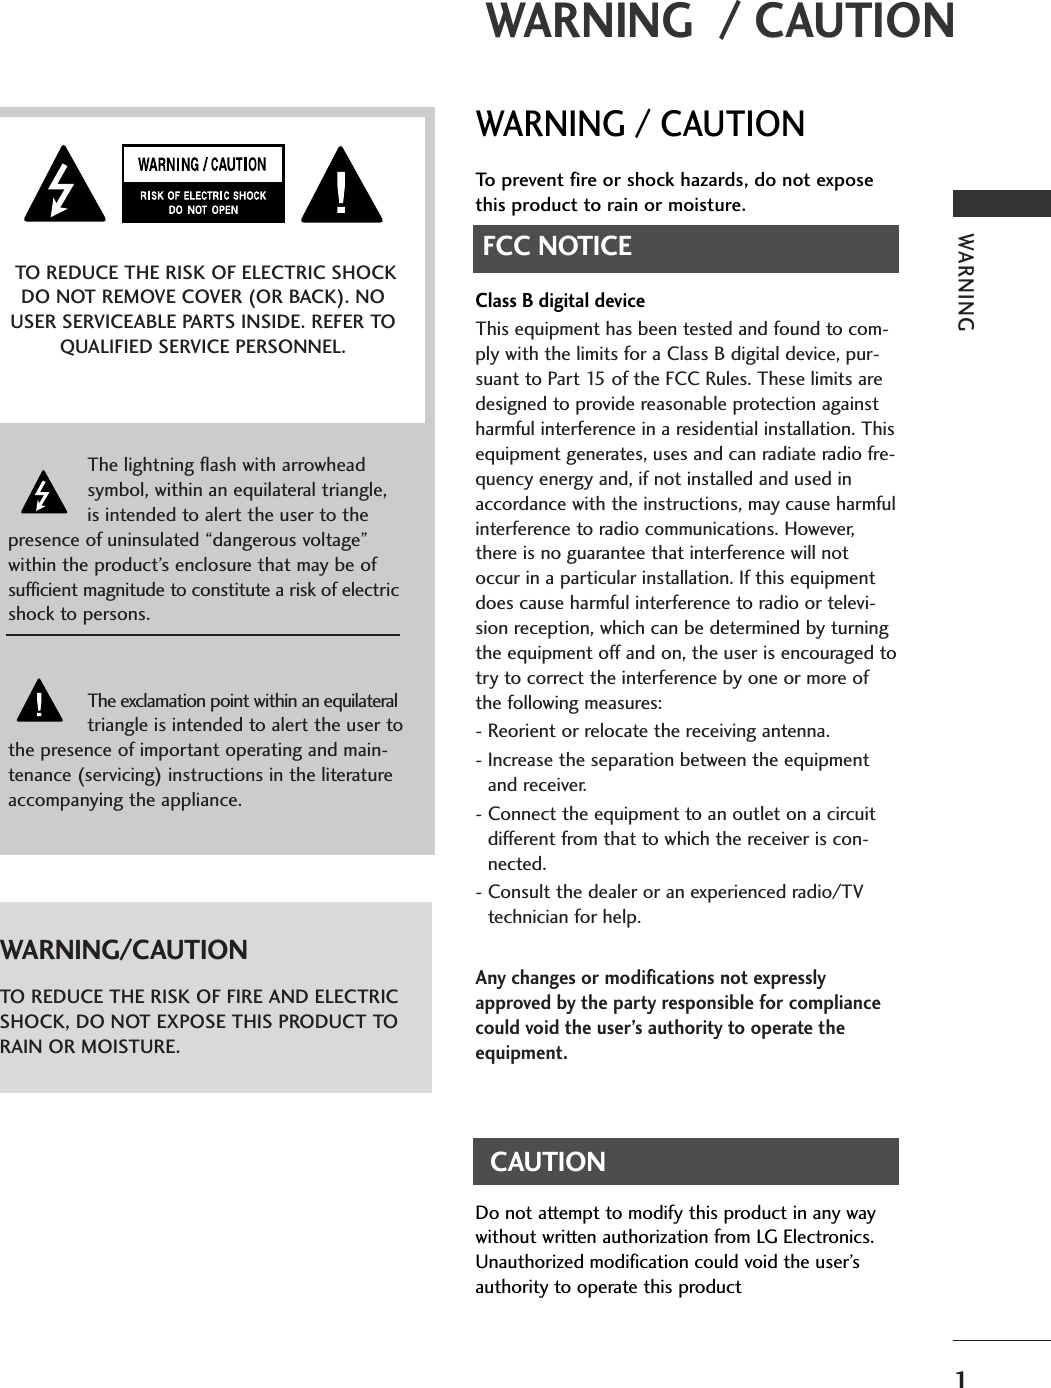 WARNING1WARNING  / CAUTIONWARNING / CAUTIONTo prevent fire or shock hazards, do not exposethis product to rain or moisture.FCC NOTICEClass B digital deviceThis equipment has been tested and found to com-ply with the limits for a Class B digital device, pur-suant to Part 15 of the FCC Rules. These limits aredesigned to provide reasonable protection againstharmful interference in a residential installation. Thisequipment generates, uses and can radiate radio fre-quency energy and, if not installed and used inaccordance with the instructions, may cause harmfulinterference to radio communications. However,there is no guarantee that interference will notoccur in a particular installation. If this equipmentdoes cause harmful interference to radio or televi-sion reception, which can be determined by turningthe equipment off and on, the user is encouraged totry to correct the interference by one or more ofthe following measures:- Reorient or relocate the receiving antenna.- Increase the separation between the equipmentand receiver.- Connect the equipment to an outlet on a circuitdifferent from that to which the receiver is con-nected.- Consult the dealer or an experienced radio/TVtechnician for help.Any changes or modifications not expresslyapproved by the party responsible for compliancecould void the user’s authority to operate theequipment. CAUTIONDo not attempt to modify this product in any waywithout written authorization from LG Electronics.Unauthorized modification could void the user’sauthority to operate this product The lightning flash with arrowheadsymbol, within an equilateral triangle,is intended to alert the user to thepresence of uninsulated “dangerous voltage”within the product’s enclosure that may be ofsufficient magnitude to constitute a risk of electricshock to persons.The exclamation point within an equilateraltriangle is intended to alert the user tothe presence of important operating and main-tenance (servicing) instructions in the literatureaccompanying the appliance.TO REDUCE THE RISK OF ELECTRIC SHOCKDO NOT REMOVE COVER (OR BACK). NOUSER SERVICEABLE PARTS INSIDE. REFER TOQUALIFIED SERVICE PERSONNEL.WARNING/CAUTIONTO REDUCE THE RISK OF FIRE AND ELECTRICSHOCK, DO NOT EXPOSE THIS PRODUCT TORAIN OR MOISTURE.